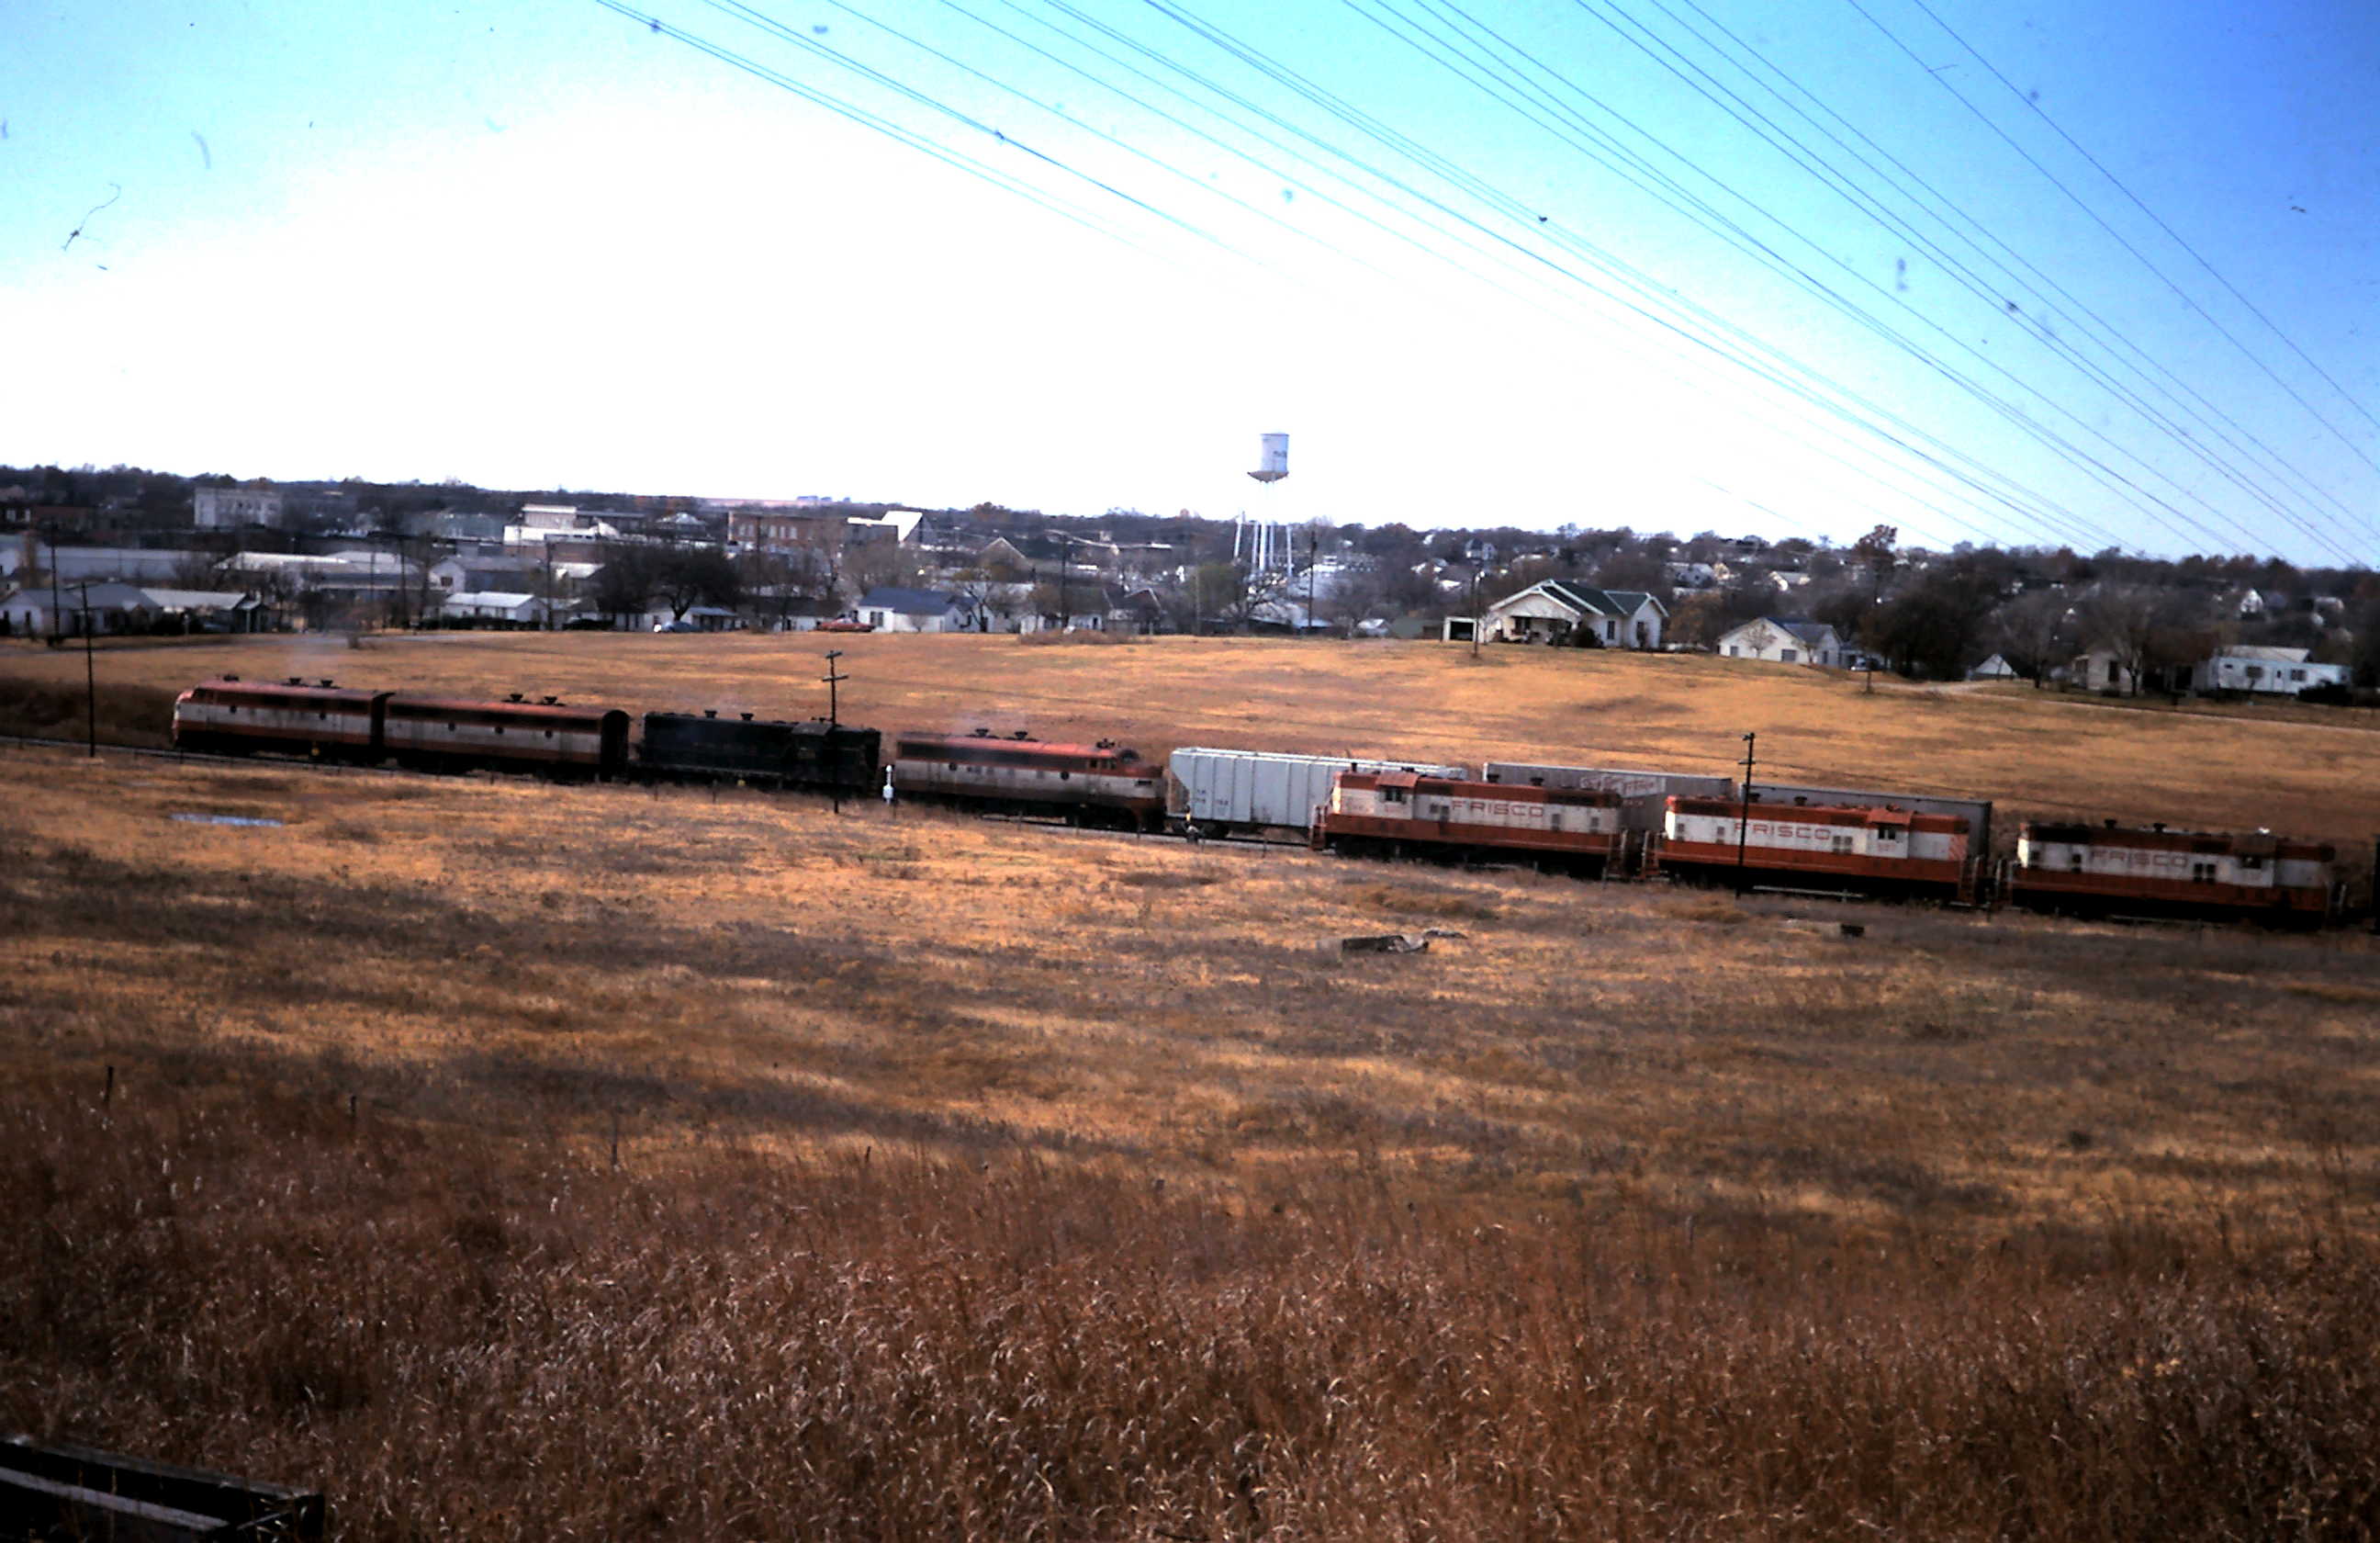 Unidentified Frisco Units (date and location unknown)